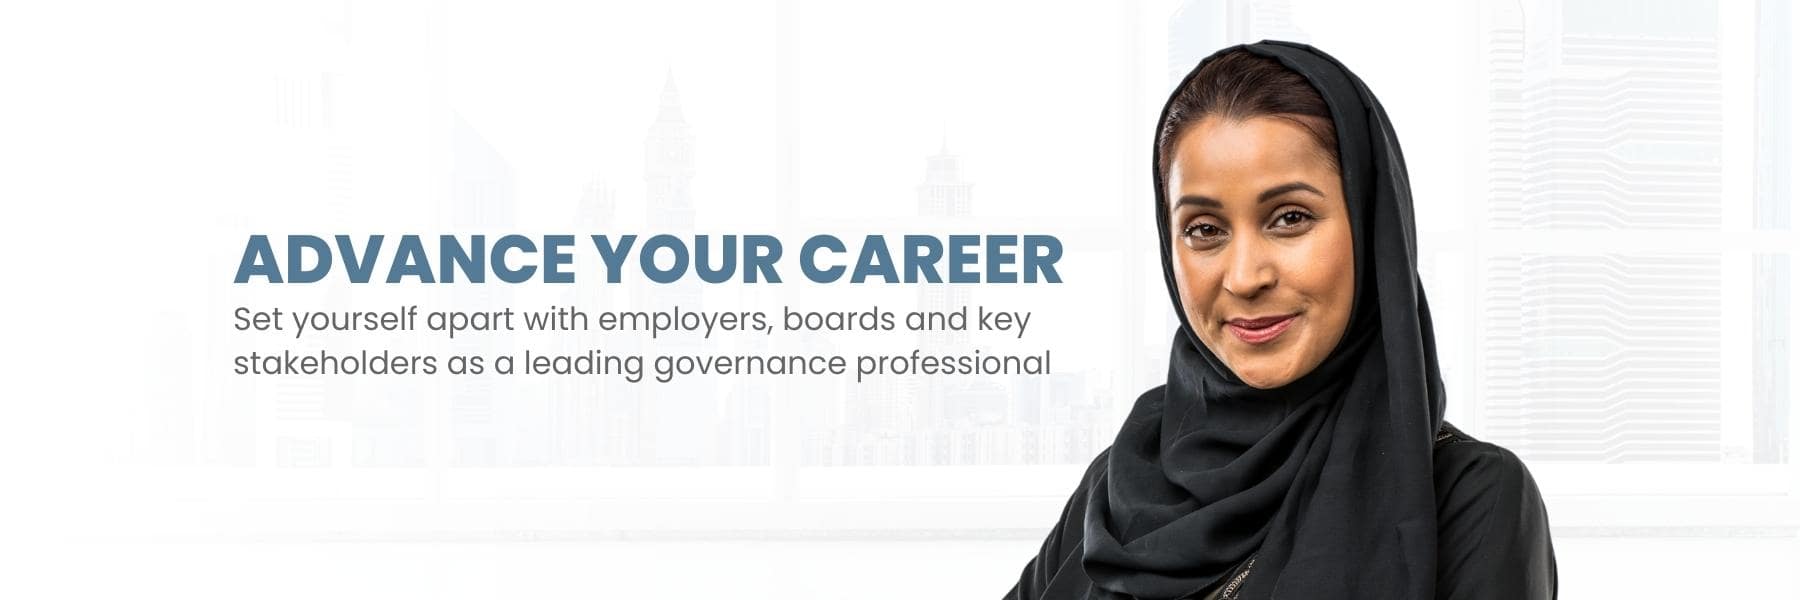 Advance your career banner